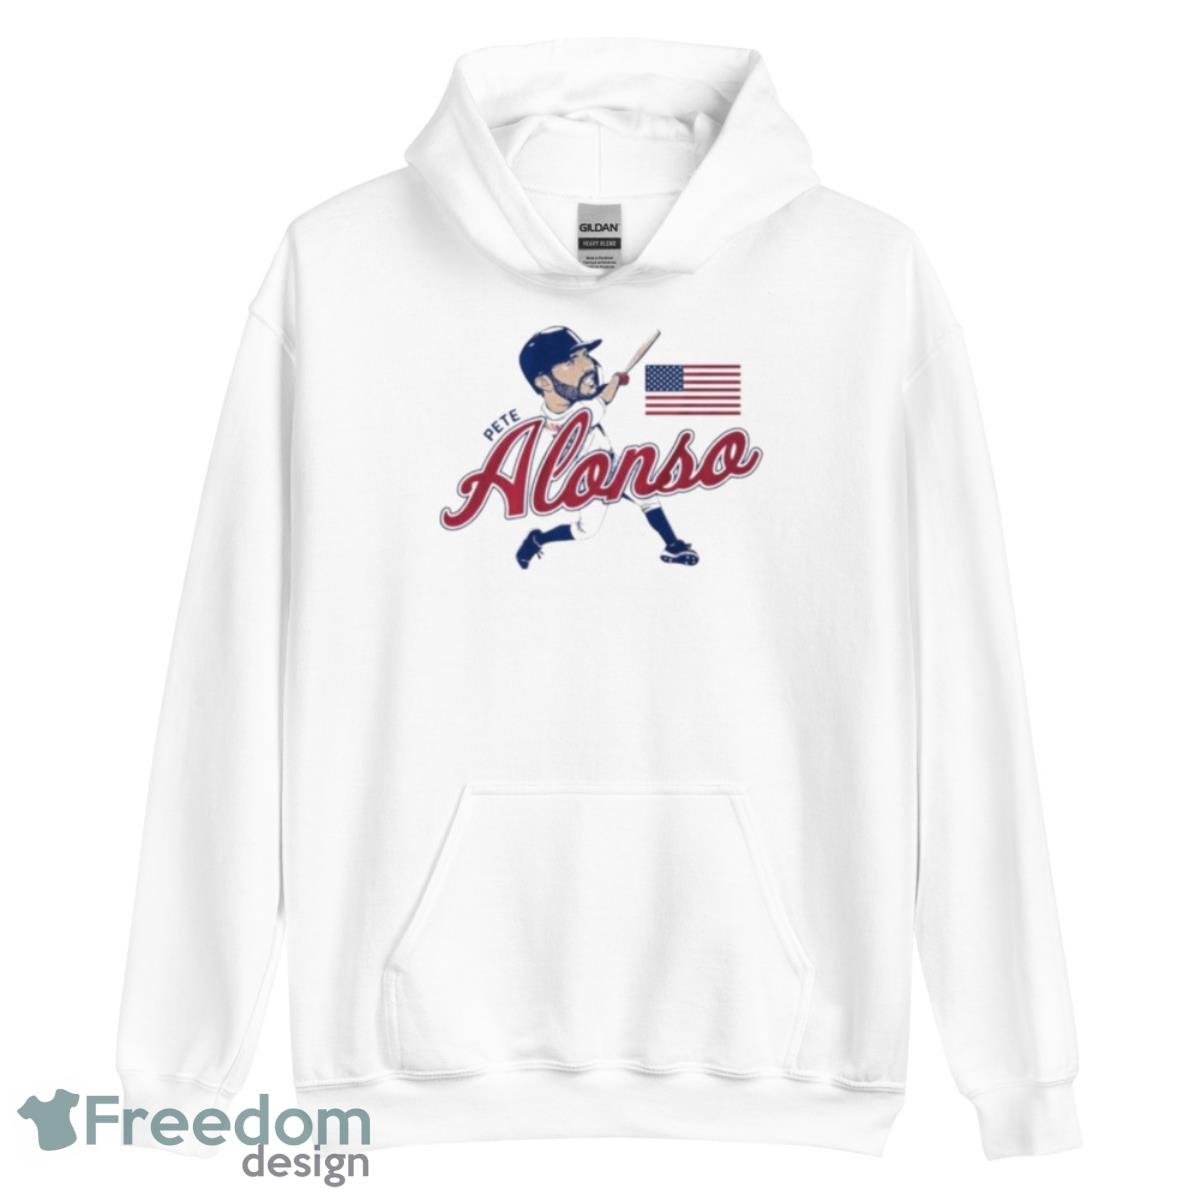 Pete Alonso New York Mets USA Fflag Caricature Shirt - Freedomdesign